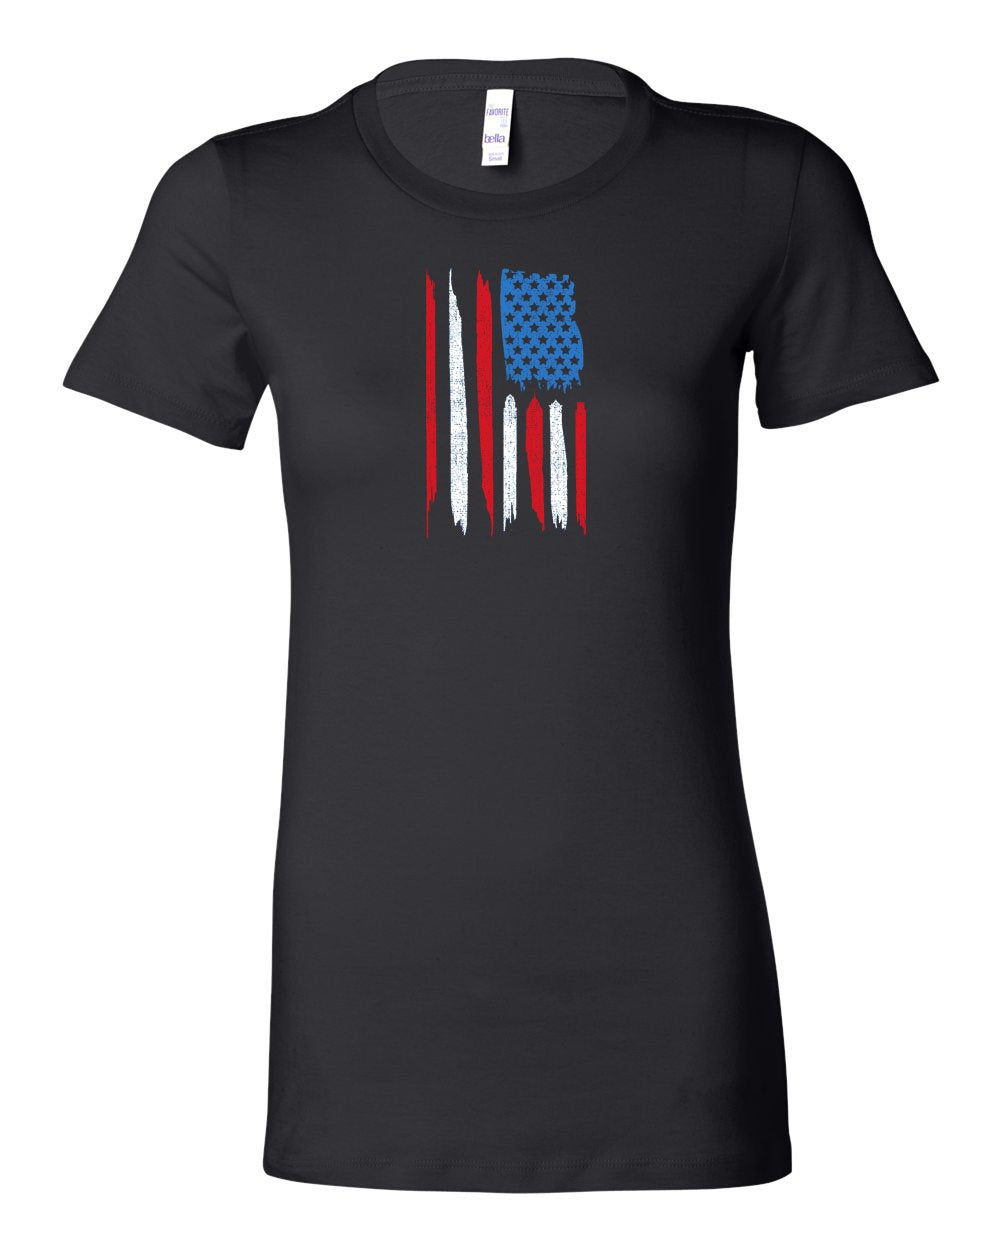 Philly City Flag LADIES Junior-Fit T-Shirt